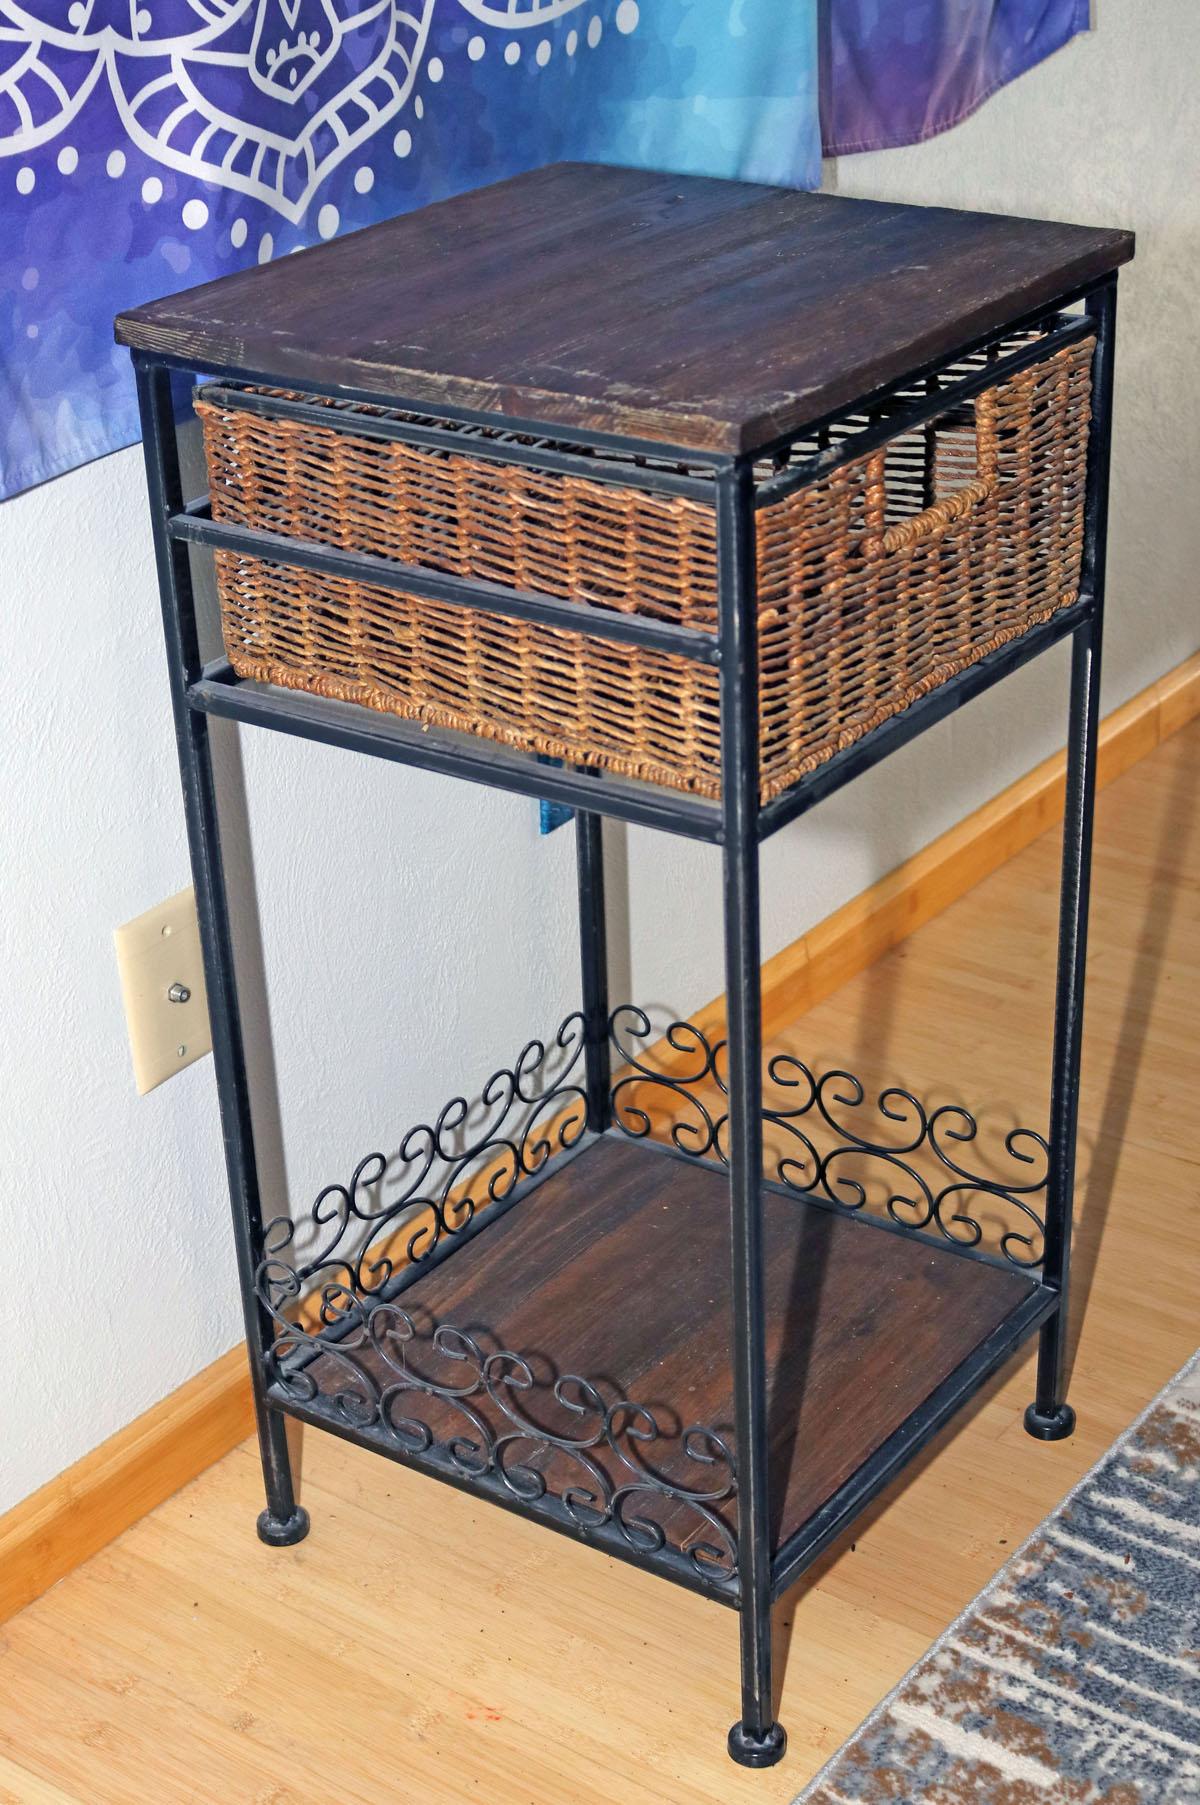 Small Stand - Table w/ Wicker Style Drawer